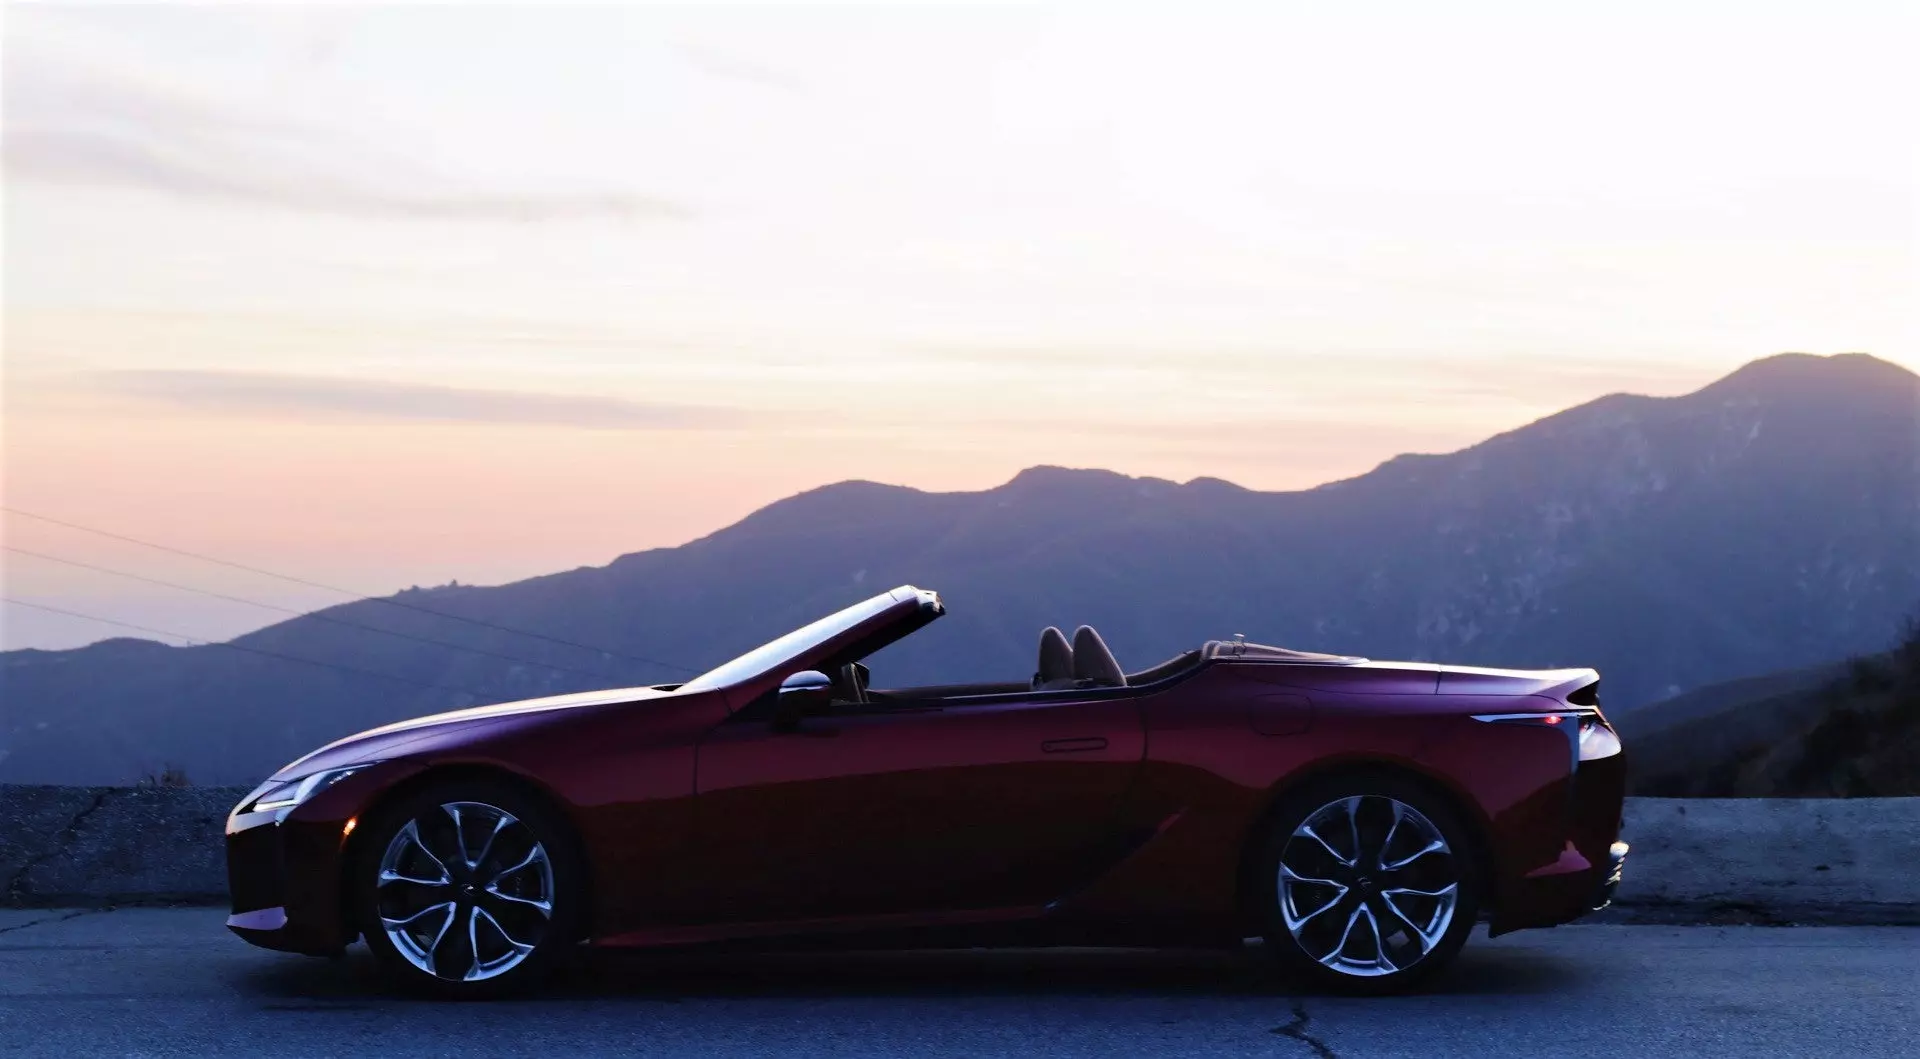 Lexus Makes One of the Most Visually Striking Cars on Sale Today | Autance